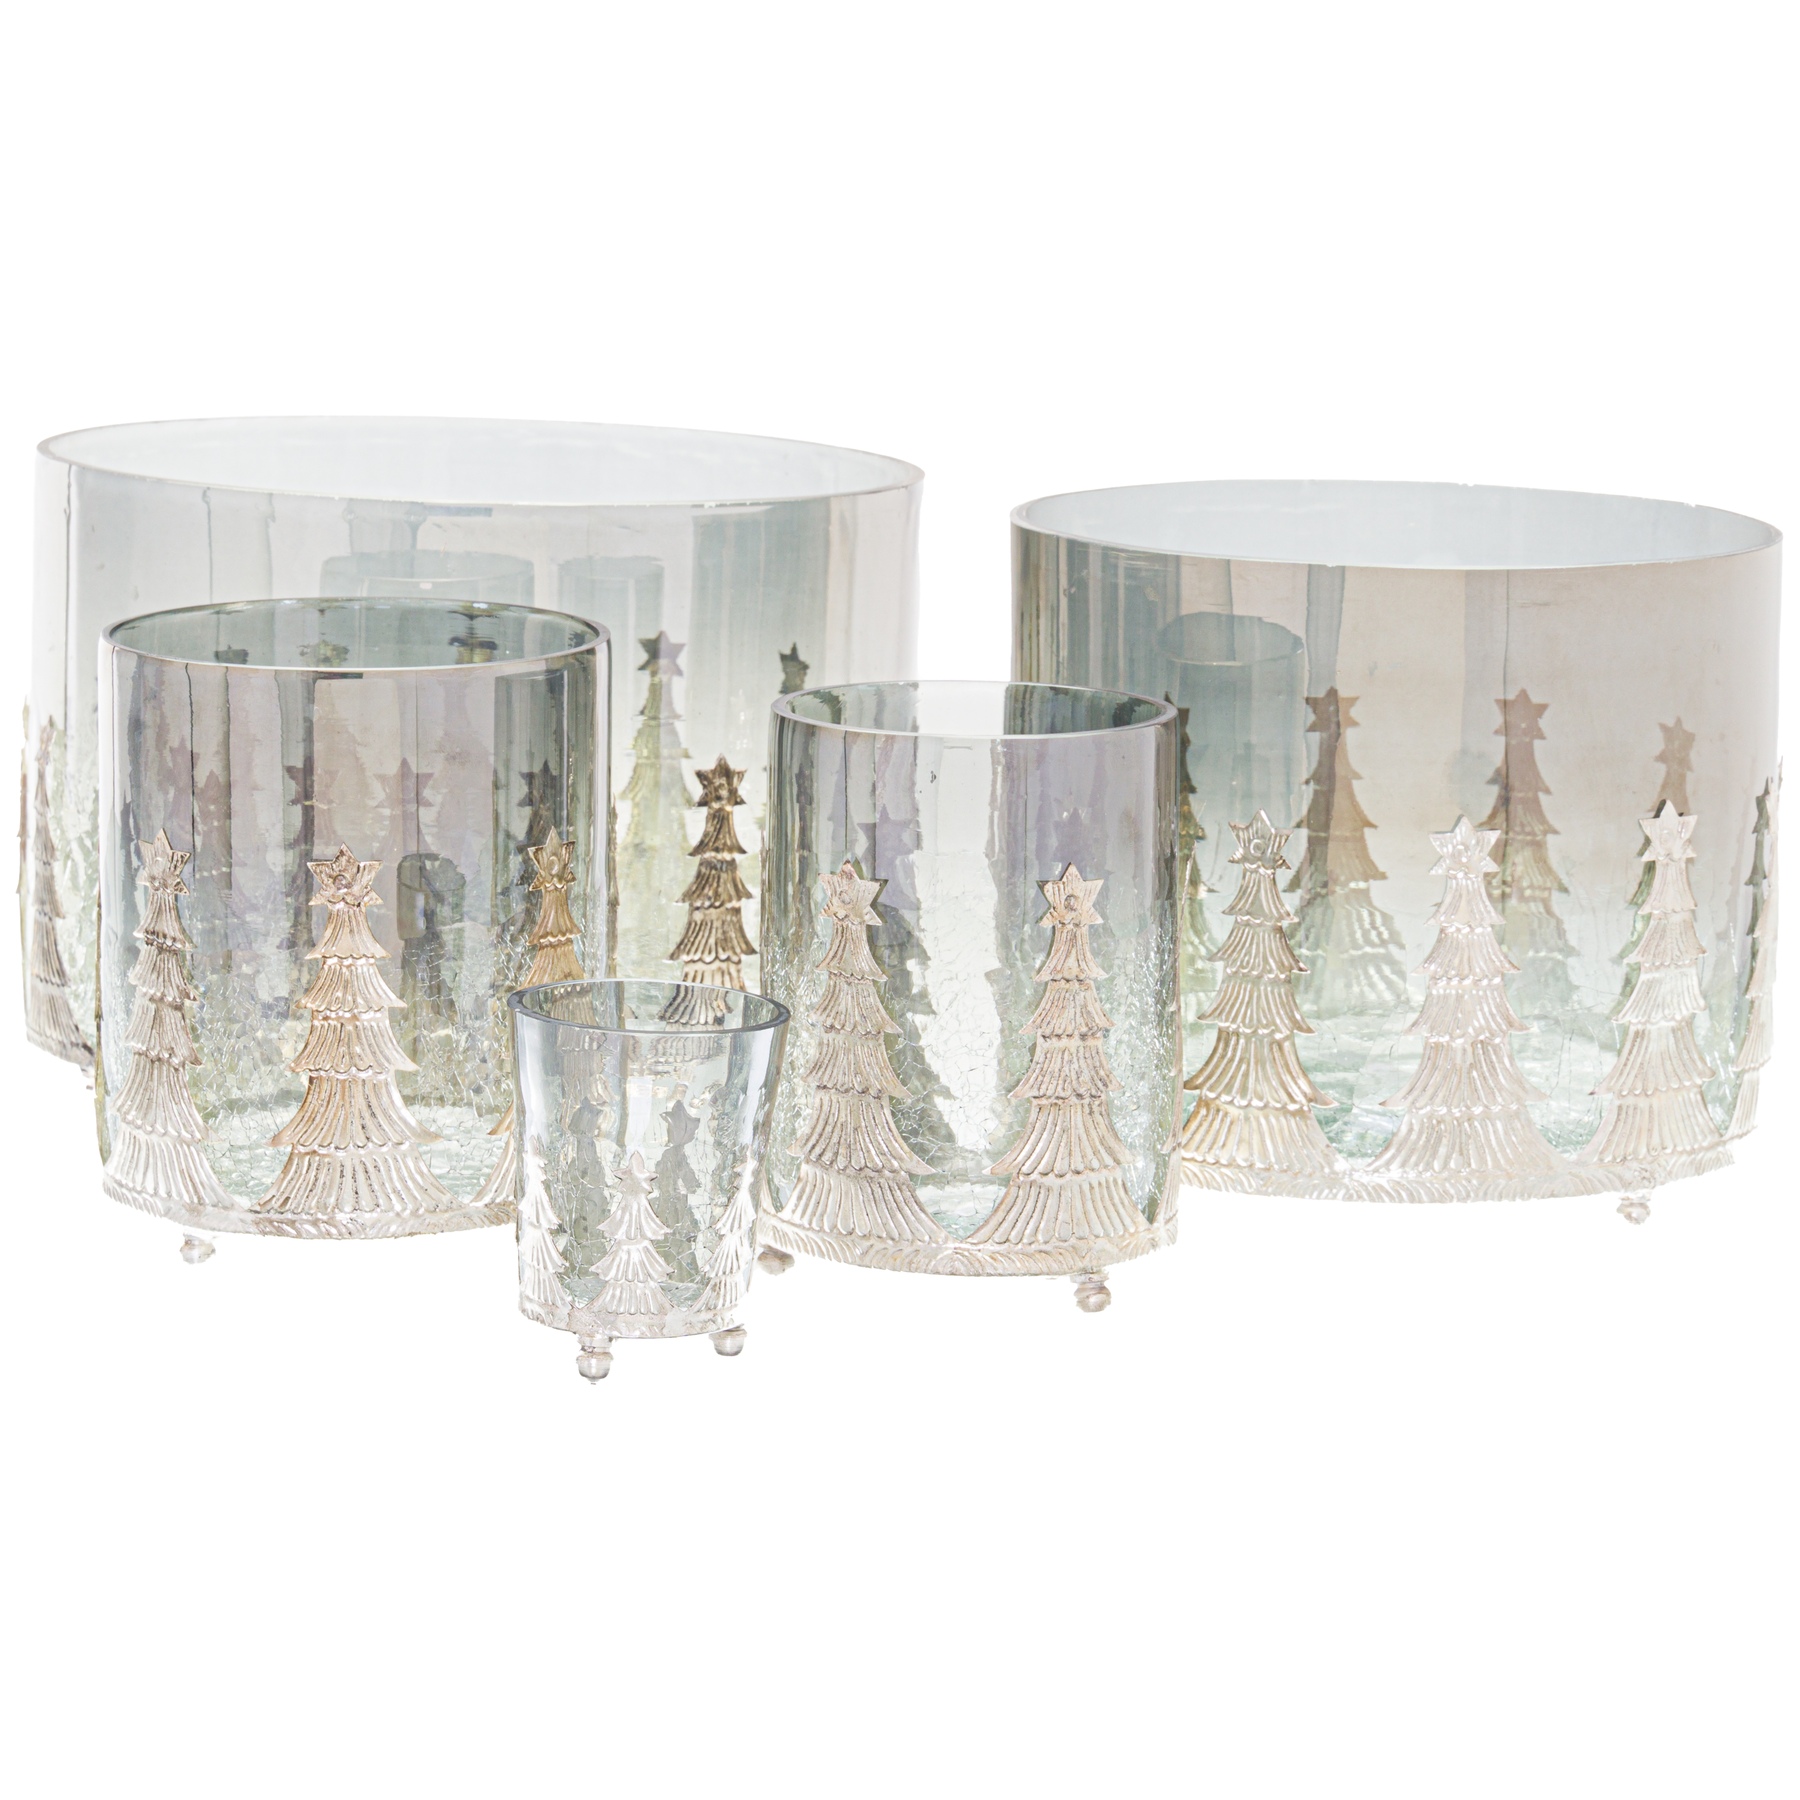 Noel Collection Small Christmas Tree Crackled Candle Holder - Image 2